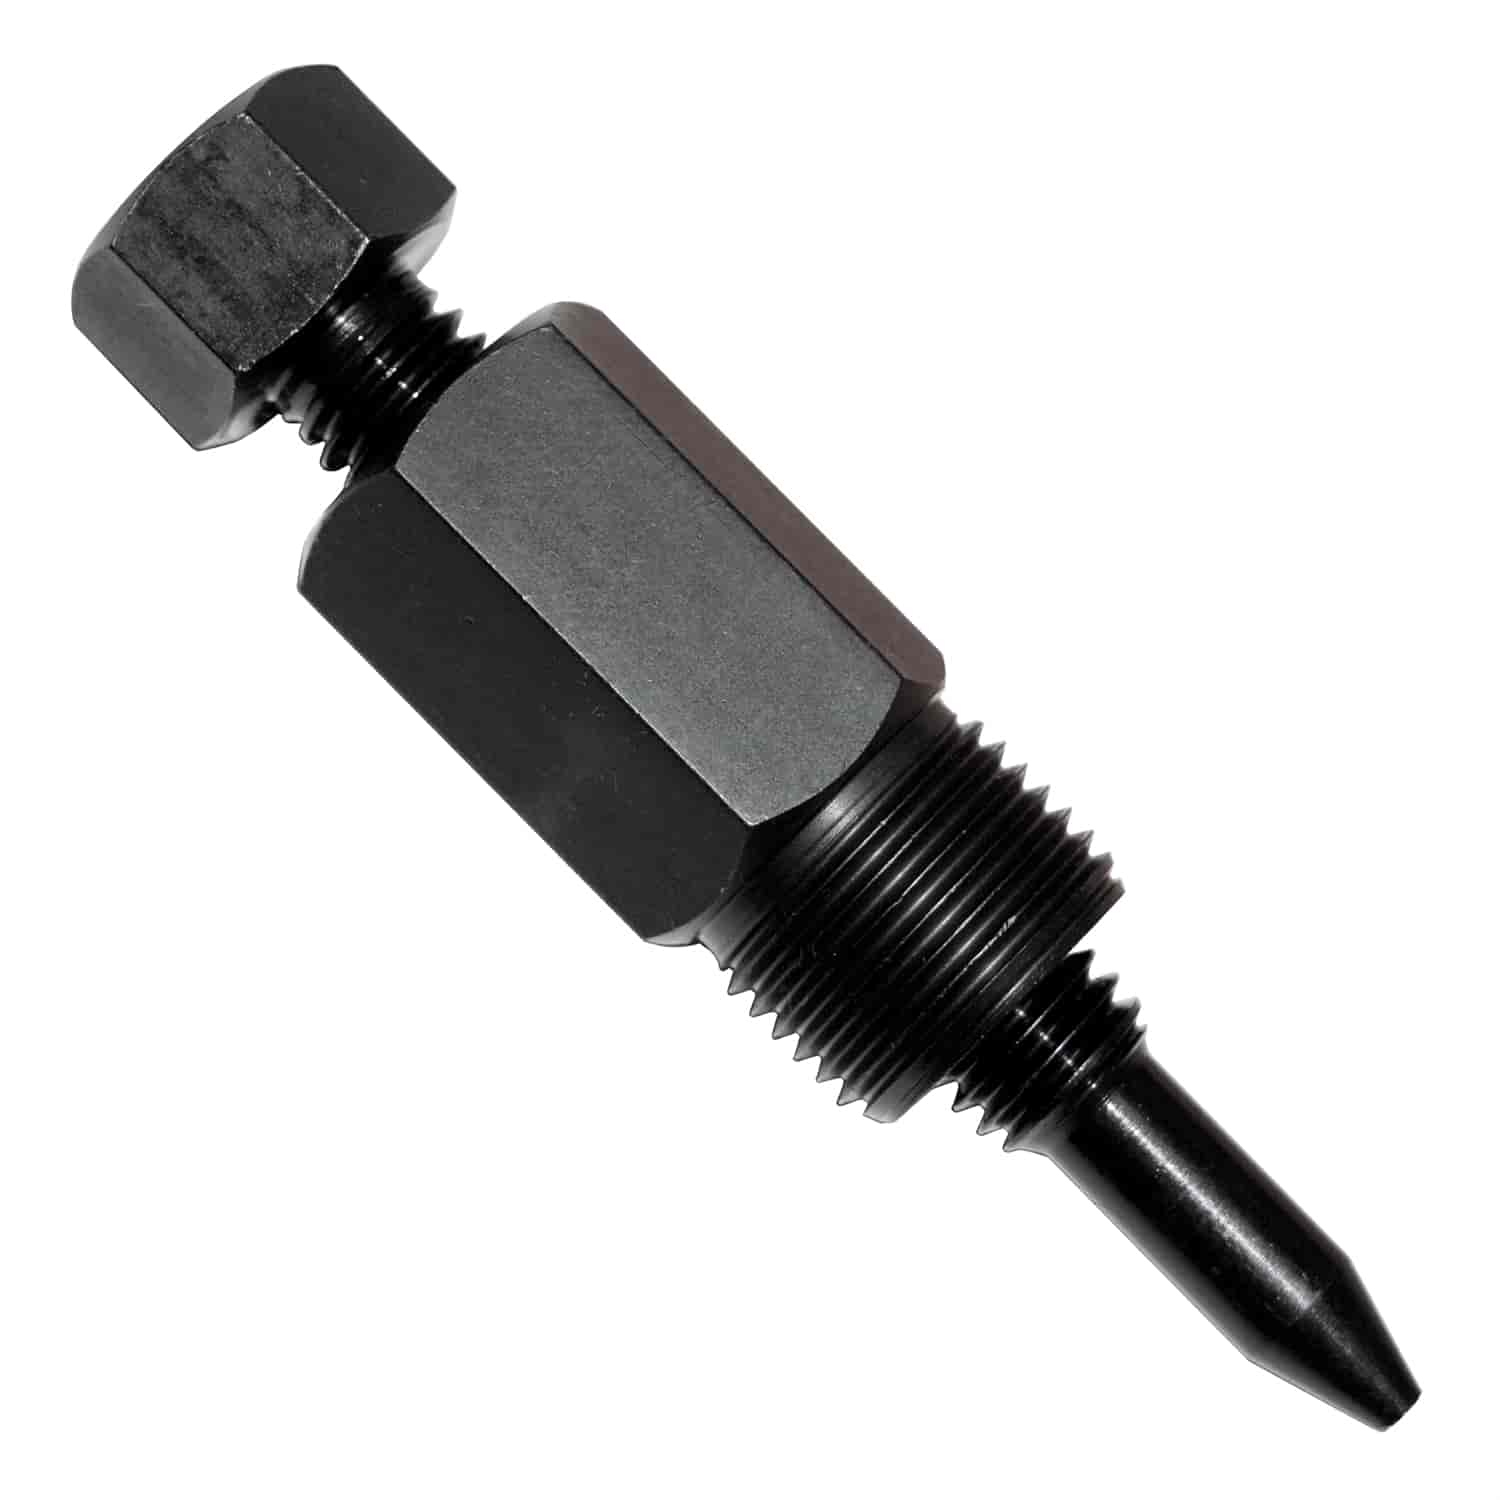 CLUTCH PLATE REMOVER